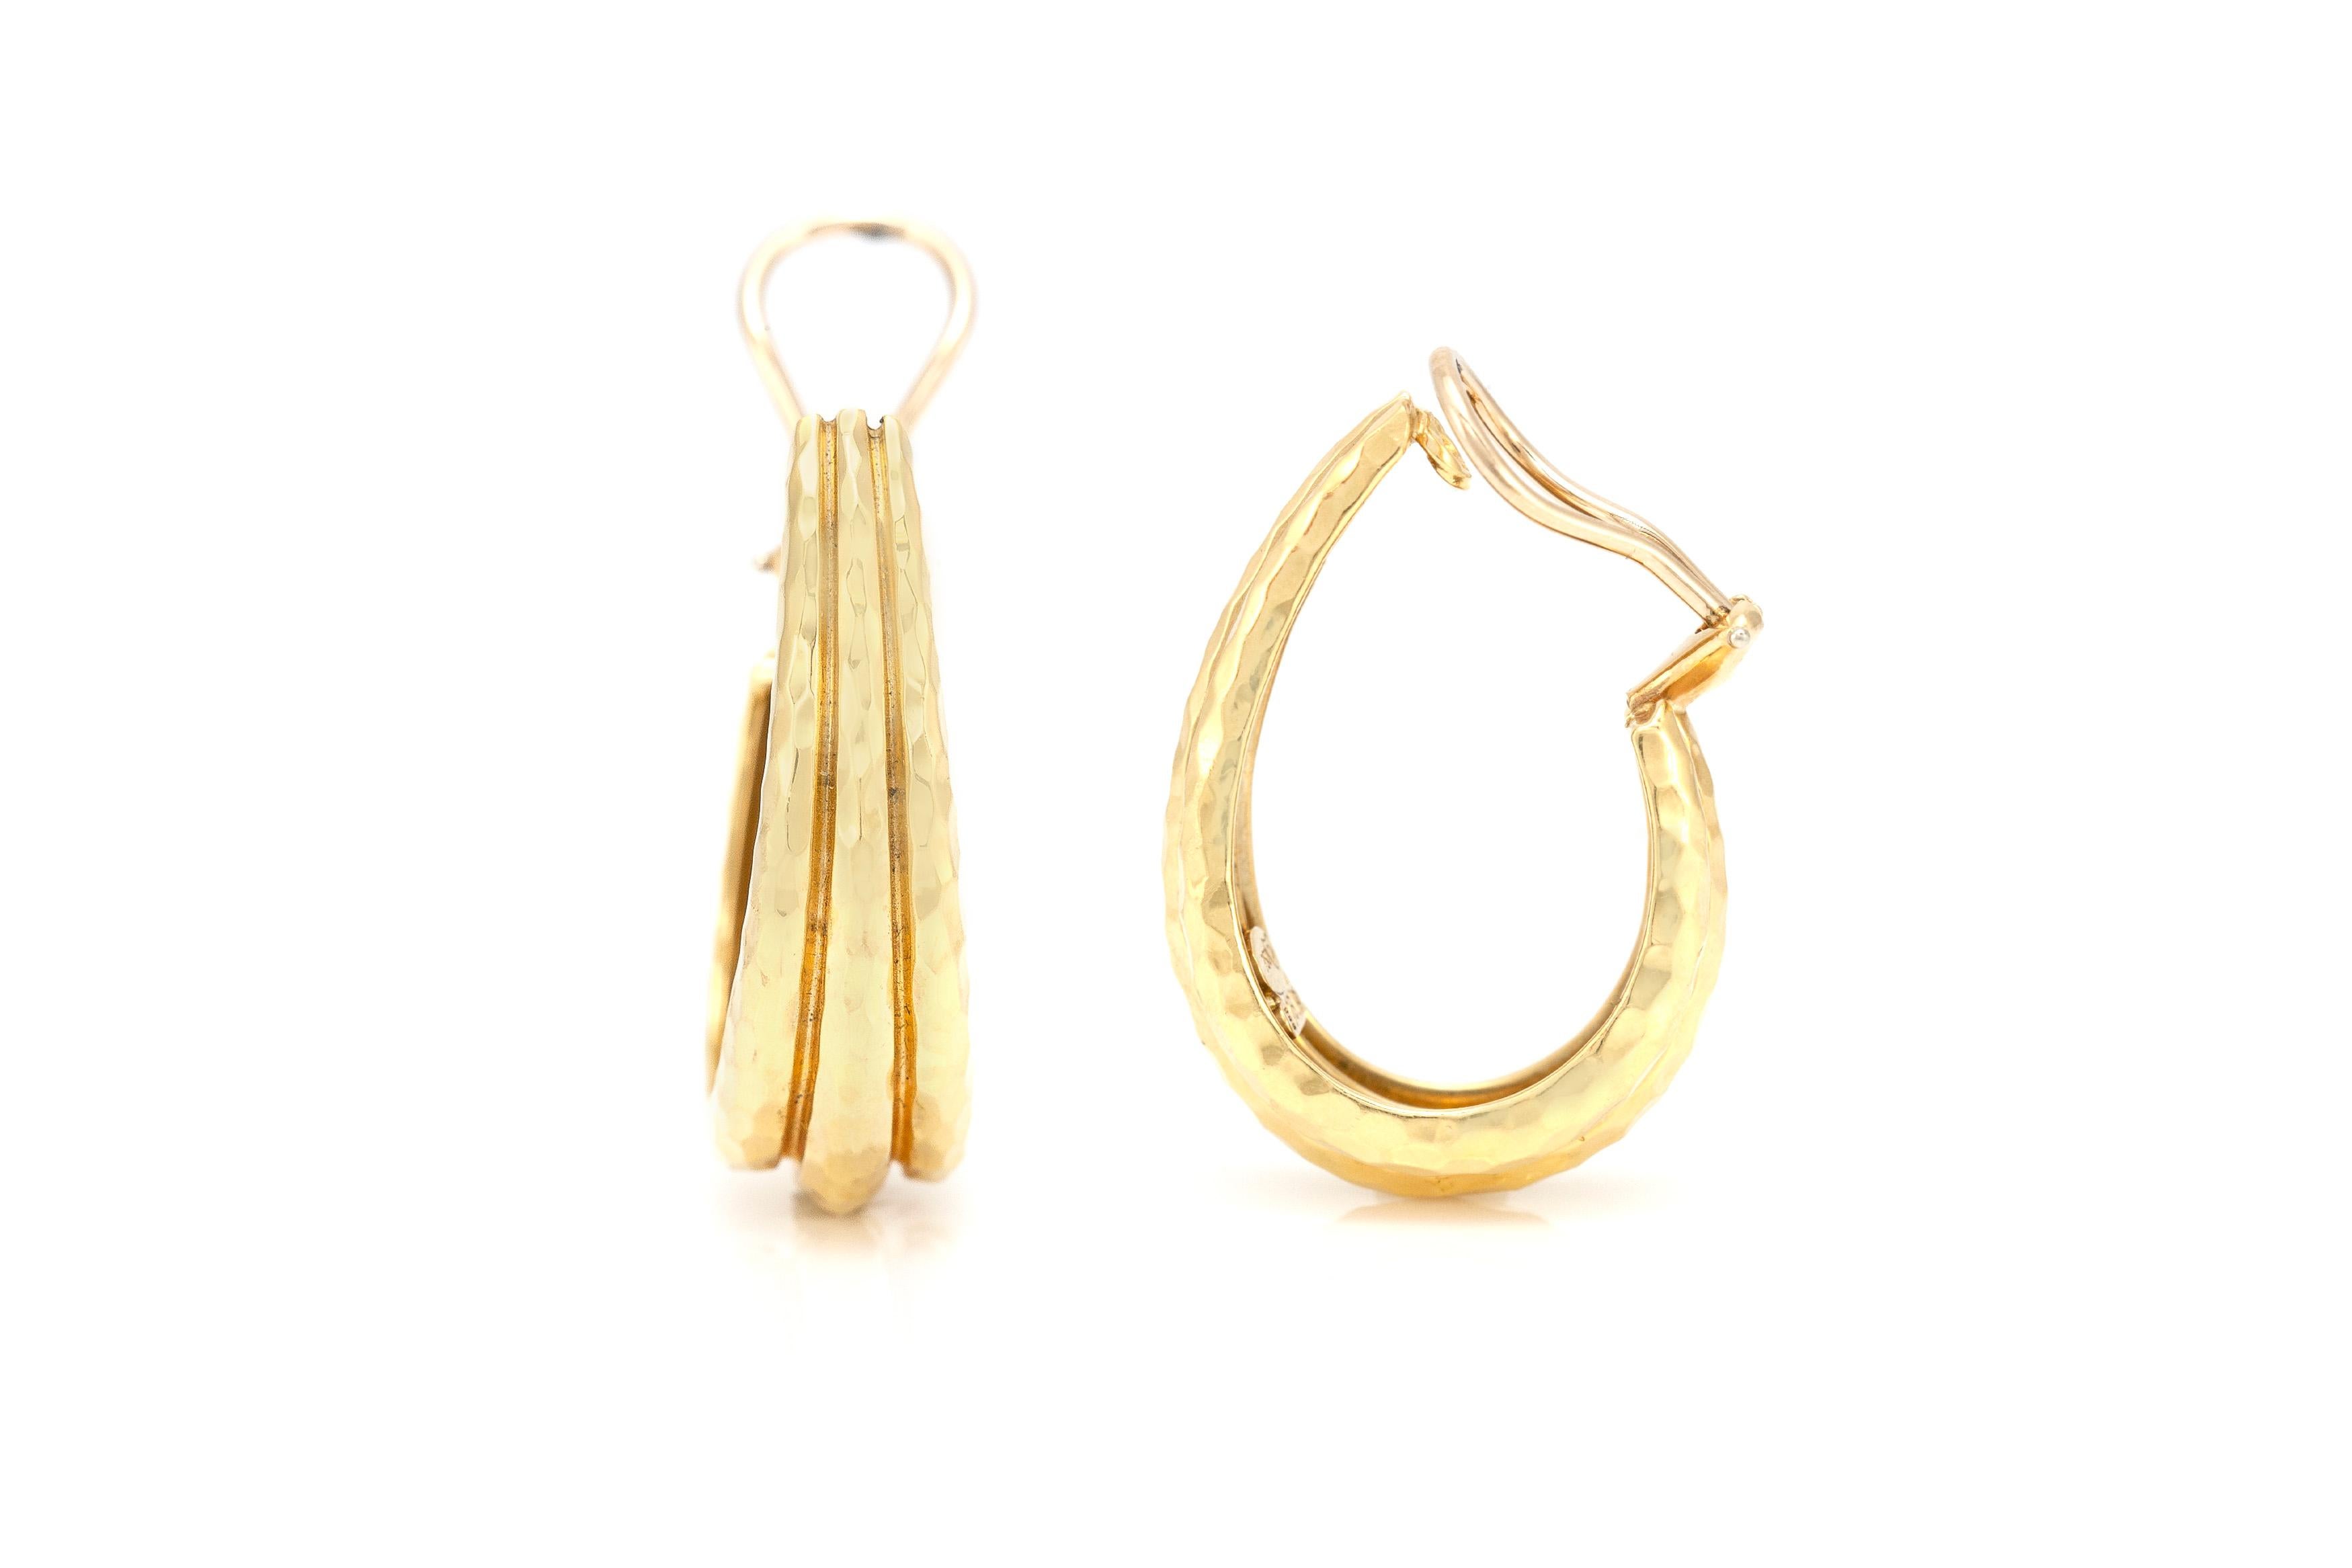 The earrings is finely crafted in 18k yellow gold and weighing total of 20.1 dwt.
sign Henry Dunay